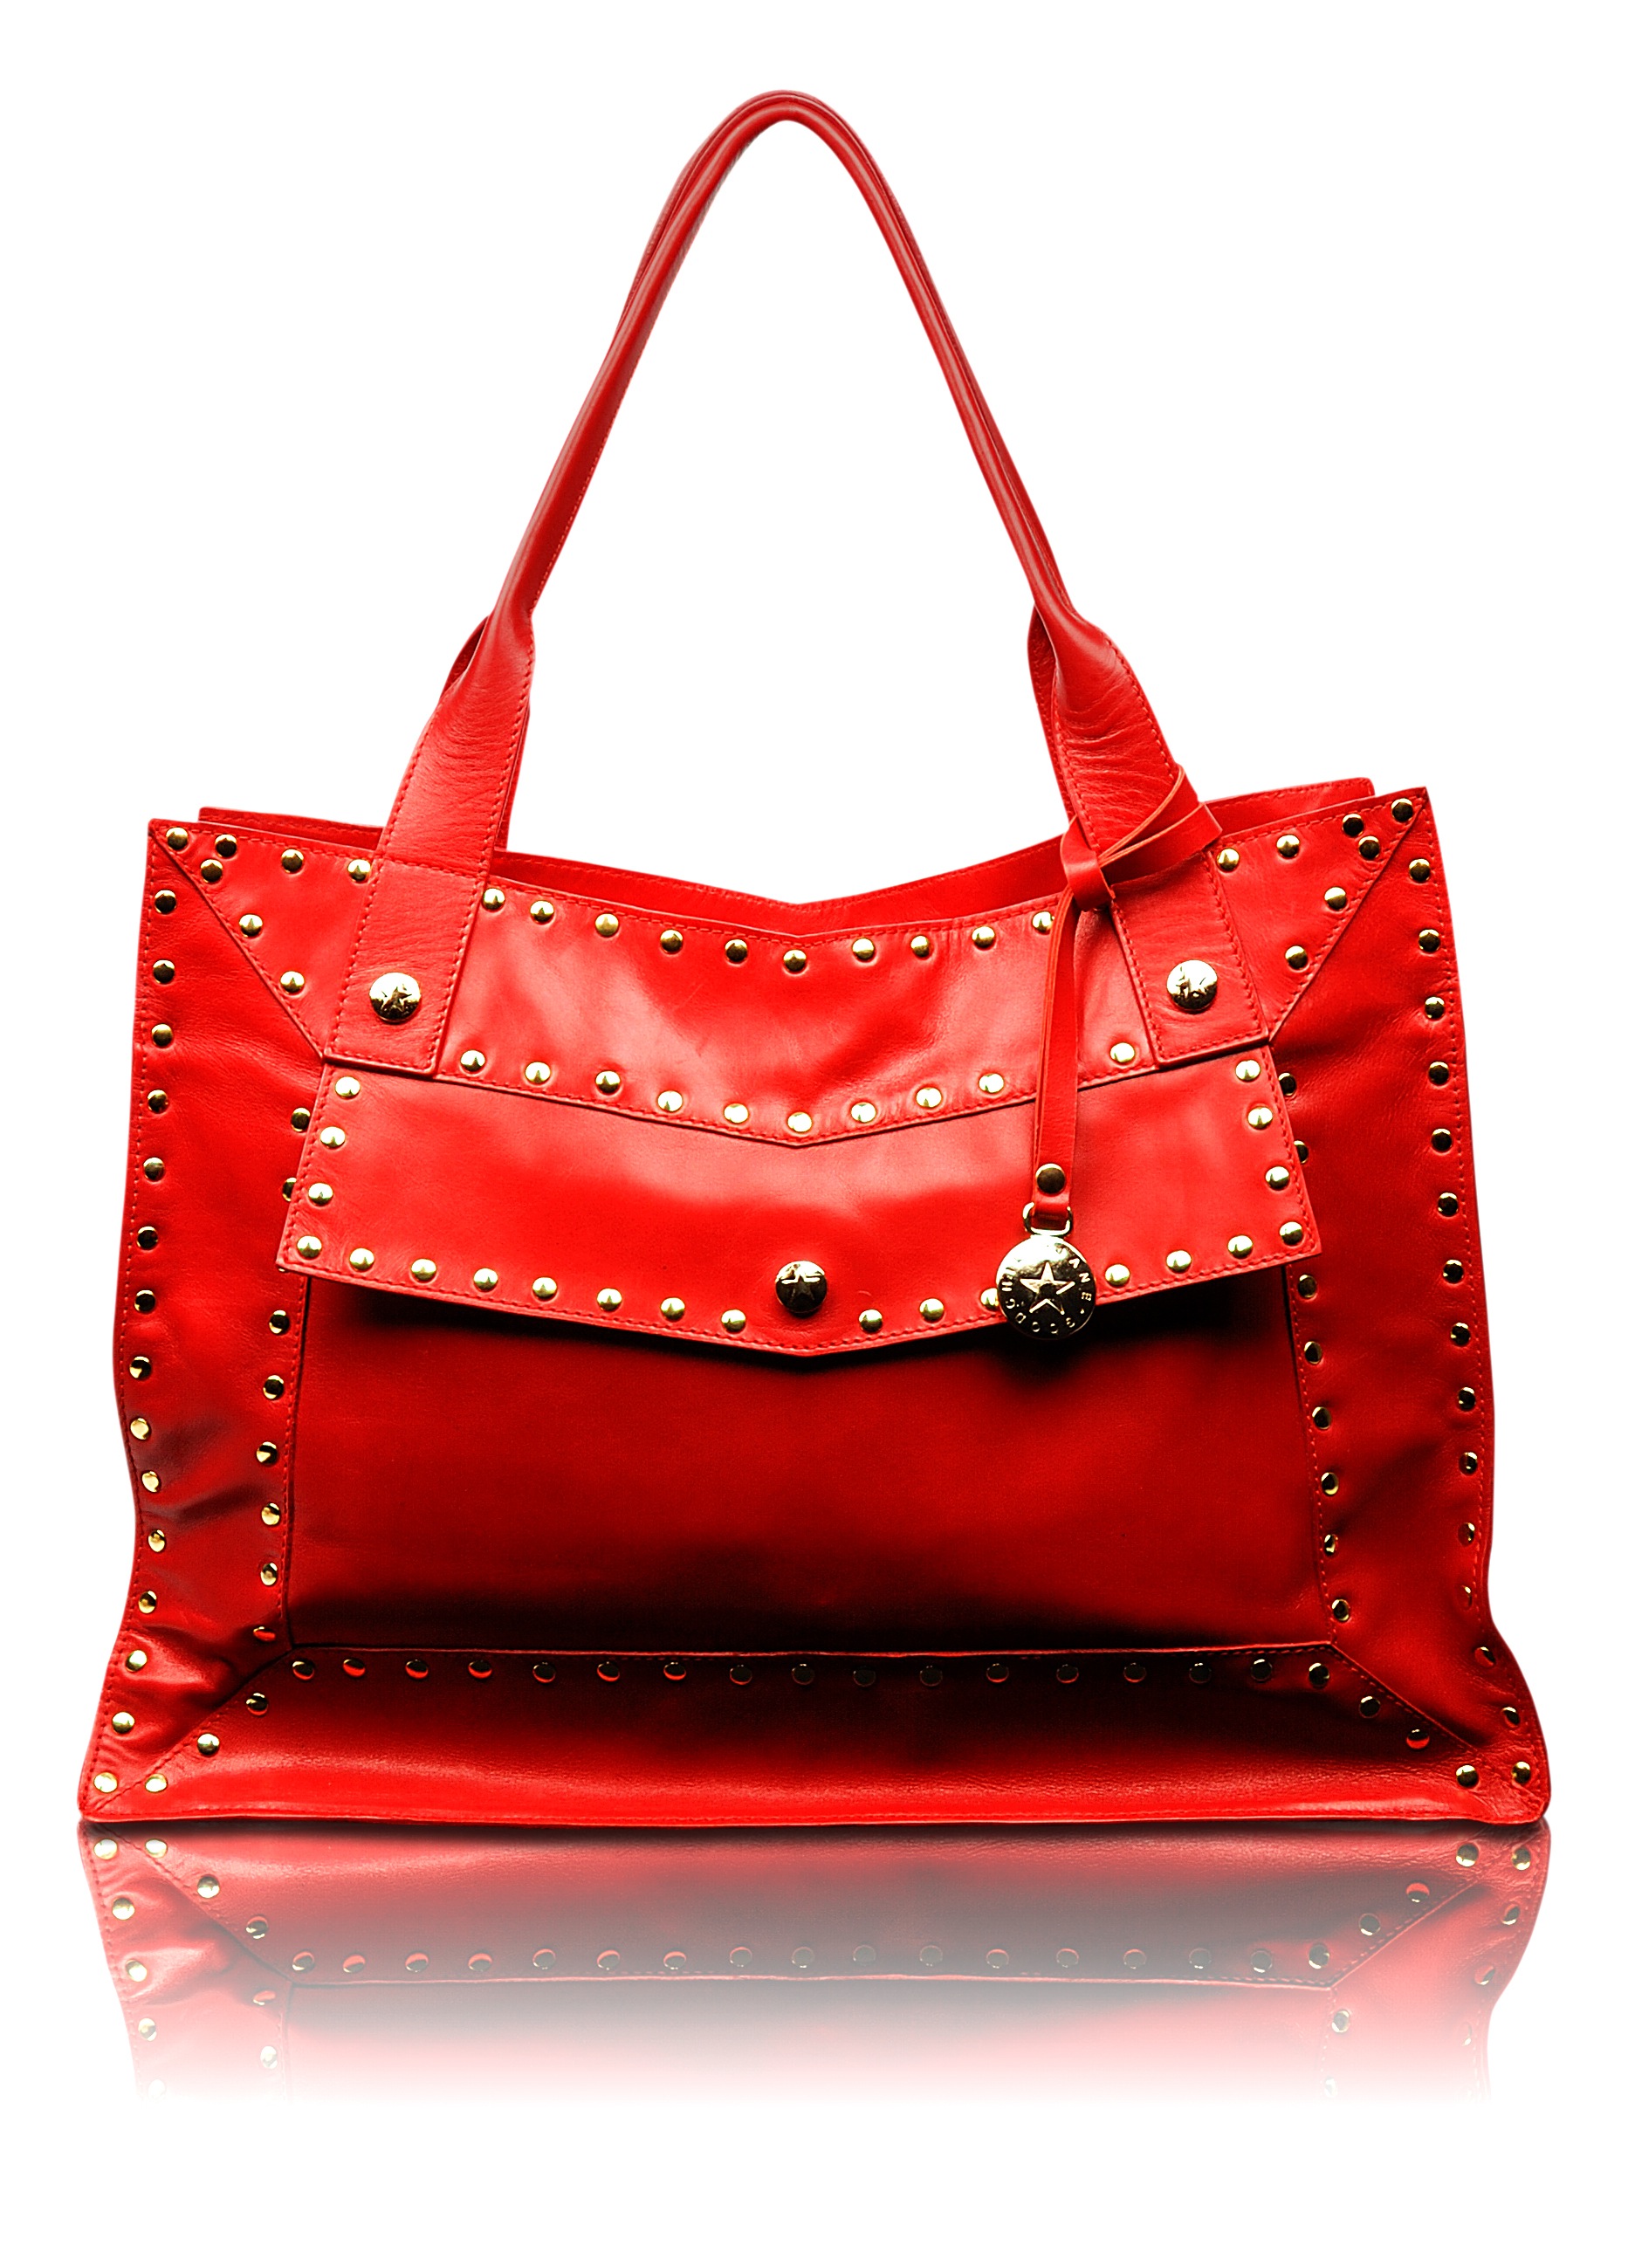 Jane Goodchild Leather Handbag.  This beautiful ‘Studded’ Garbo features sculpted lines, highlighted